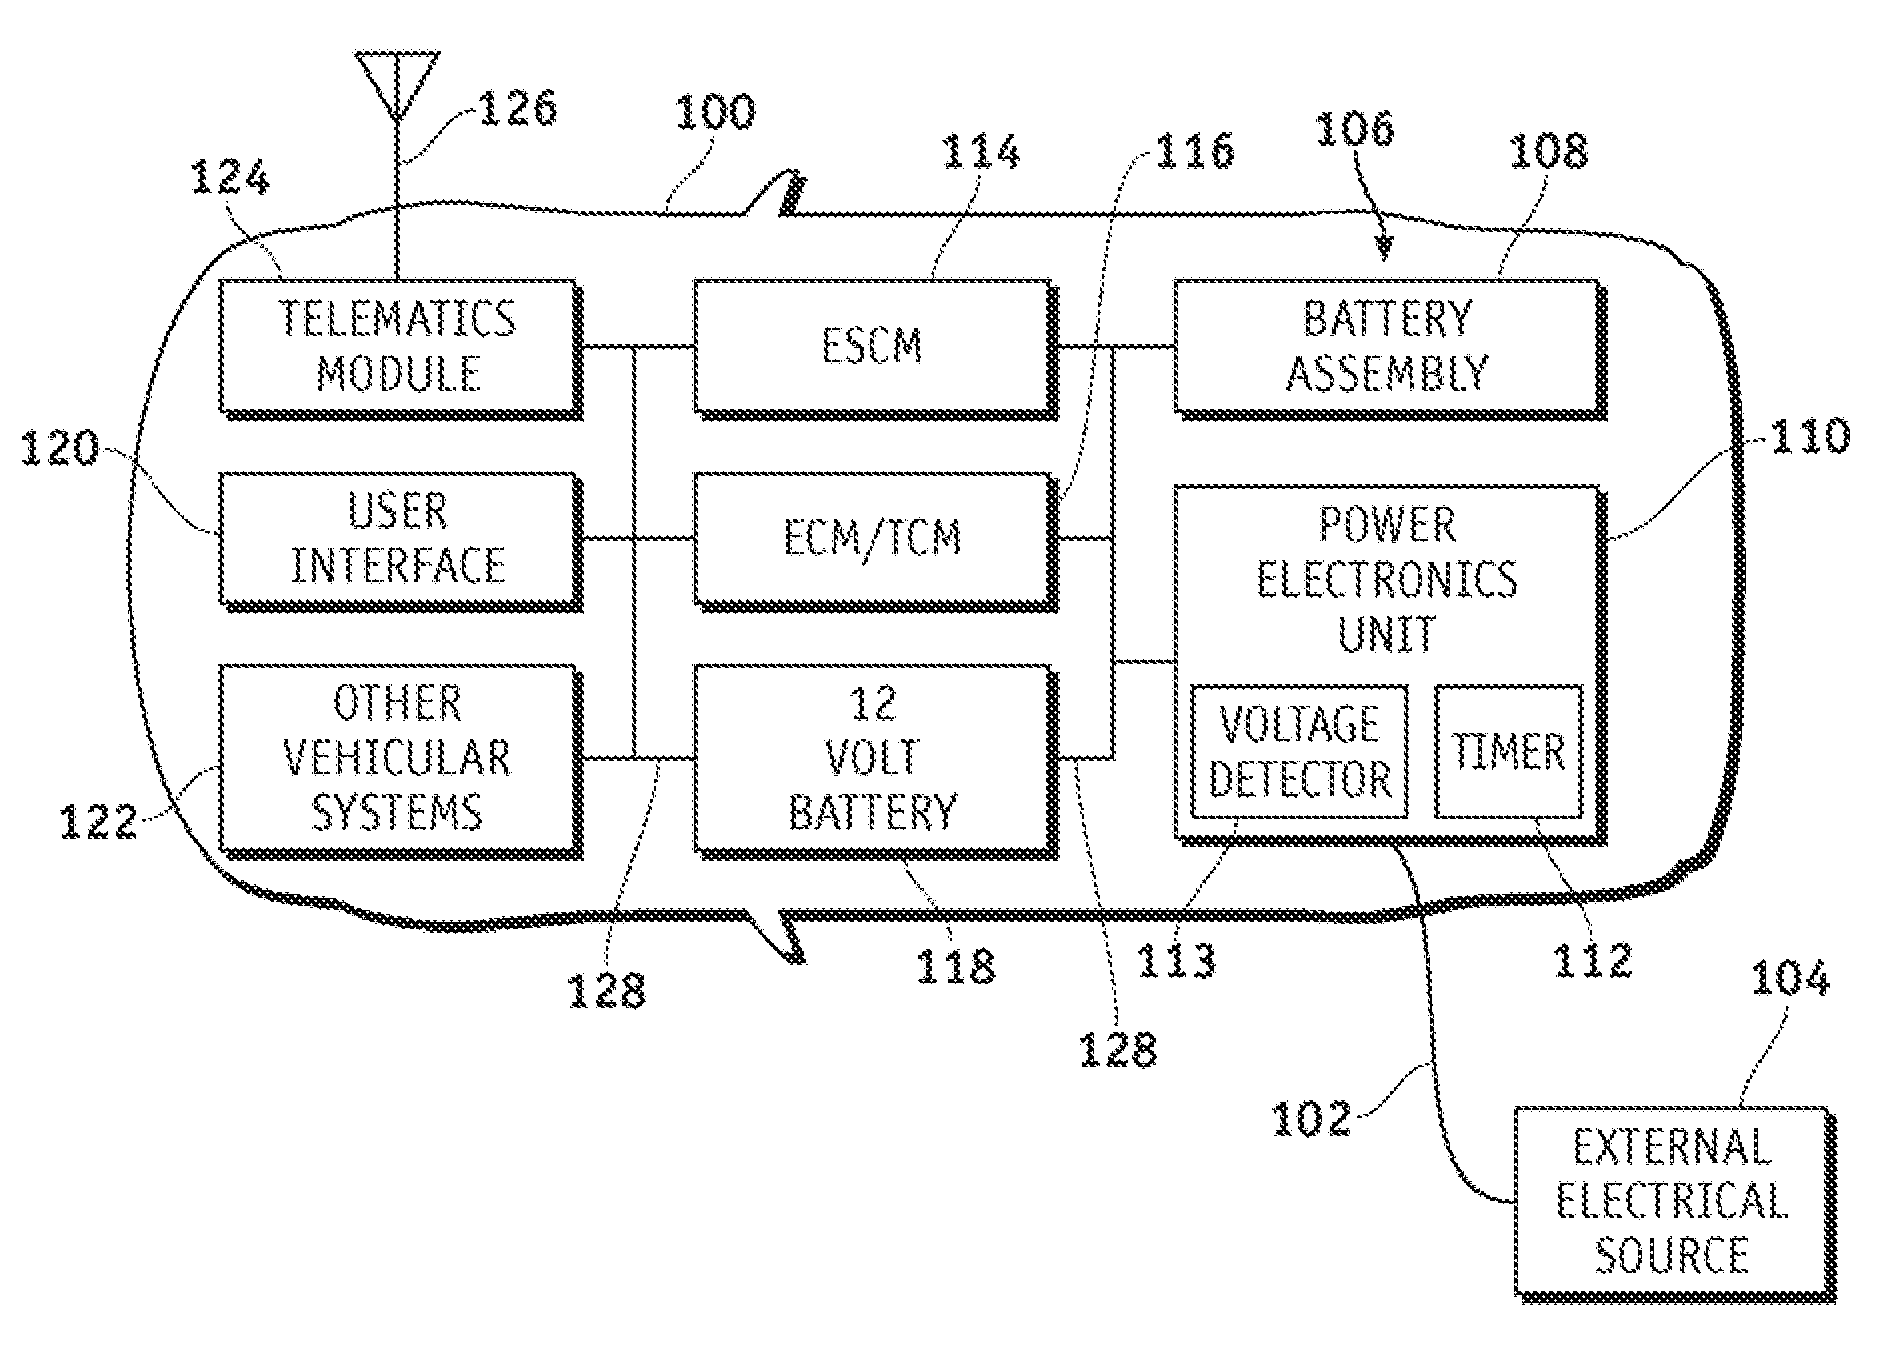 System and method for optimizing grid charging of an electric/hybrid vehicle